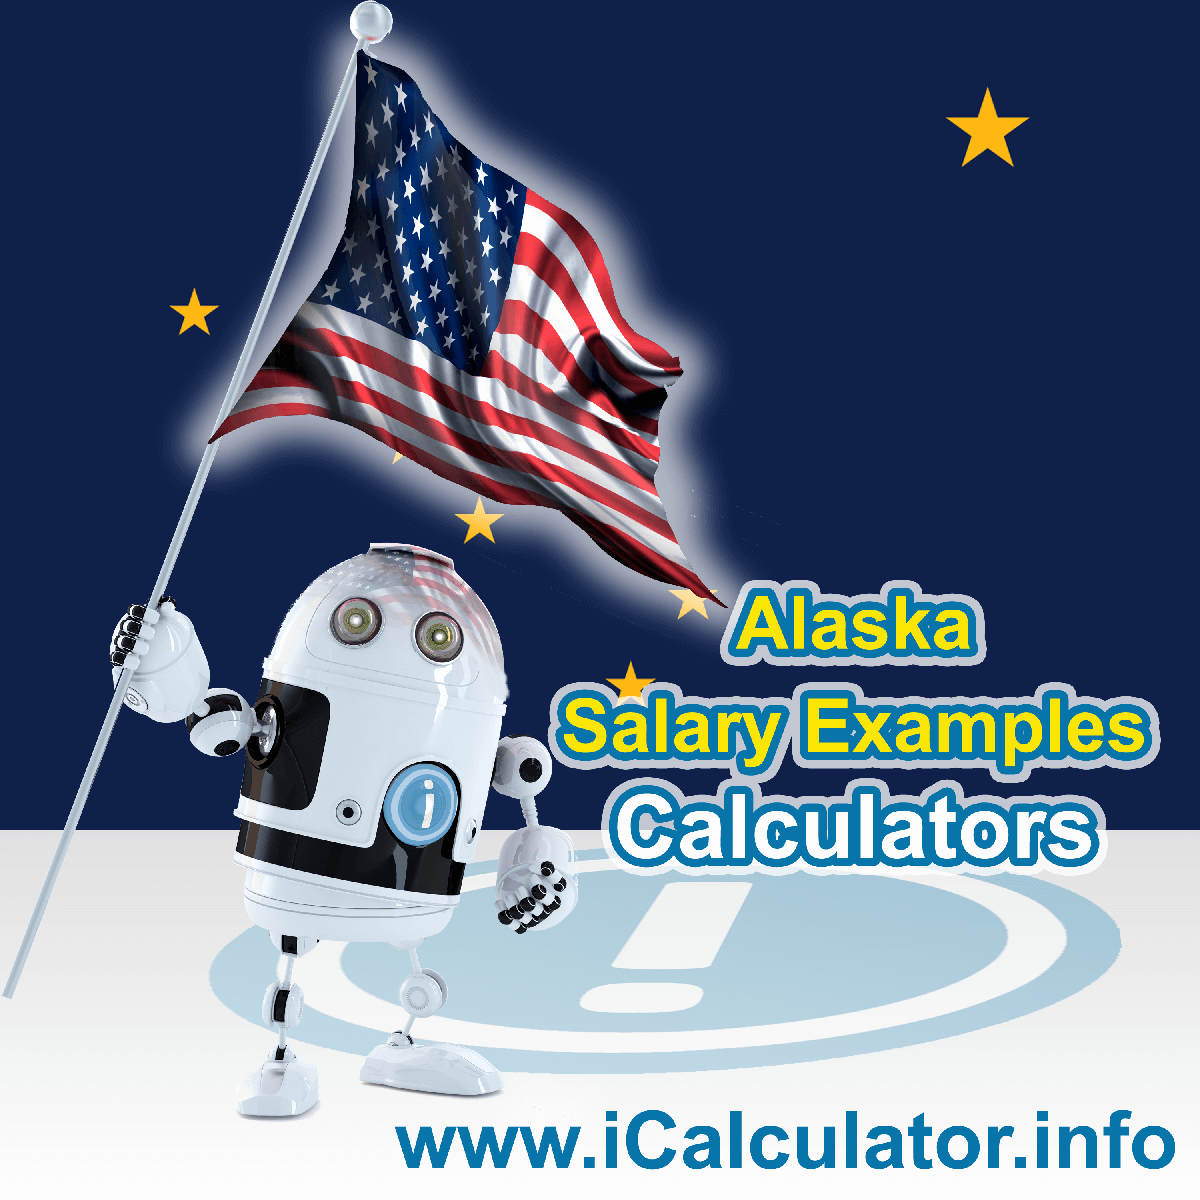 Alaska Salary Example for $ 160,000.00 in 2023 | iCalculator™ | $ 160,000.00 salary example for employee and employer paying Alaska State tincome taxes. Detailed salary after tax calculation including Alaska State Tax, Federal State Tax, Medicare Deductions, Social Security, Capital Gains and other income tax and salary deductions complete with supporting Alaska state tax tables 